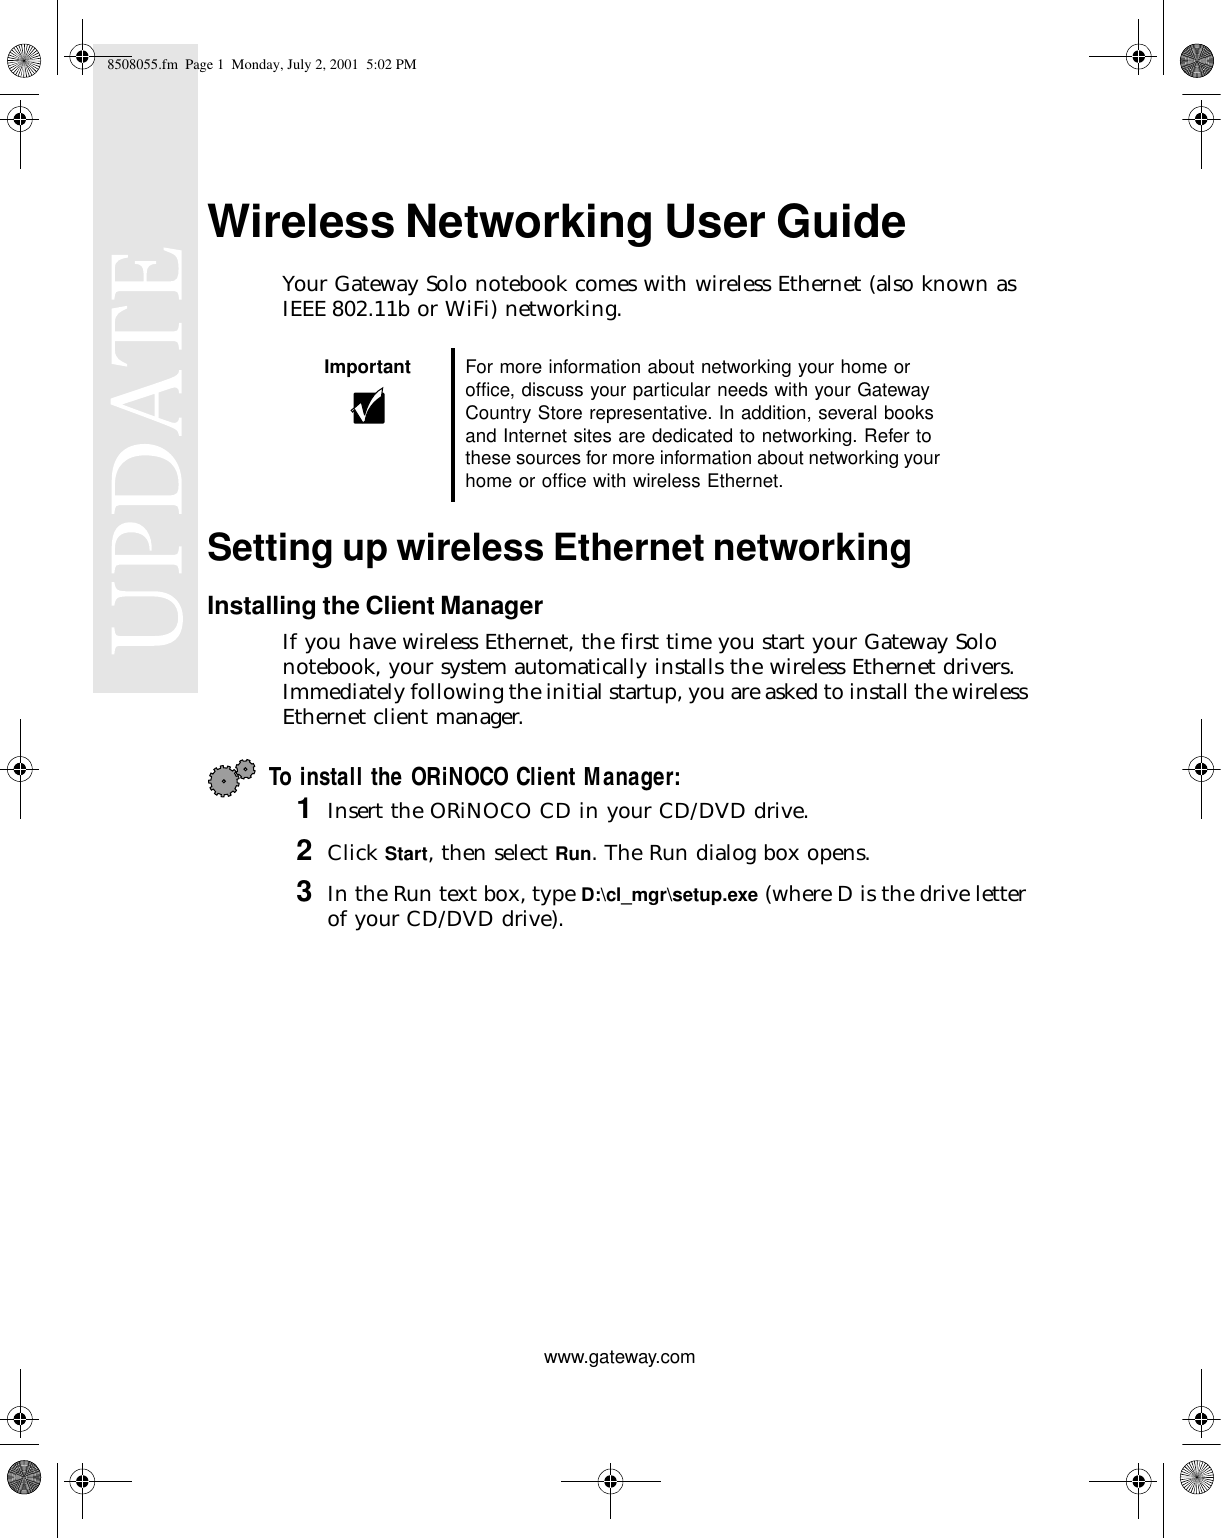 www.gateway.comWireless Networking User GuideYour Gateway Solo notebook comes with wireless Ethernet (also known as IEEE 802.11b or WiFi) networking.Setting up wireless Ethernet networkingInstalling the Client ManagerIf you have wireless Ethernet, the first time you start your Gateway Solo notebook, your system automatically installs the wireless Ethernet drivers. Immediately following the initial startup, you are asked to install the wireless Ethernet client manager.To install the ORiNOCO Client Manager:1Insert the ORiNOCO CD in your CD/DVD drive.2Click Start, then select Run. The Run dialog box opens.3In the Run text box, type D:\cl_mgr\setup.exe (where D is the drive letter of your CD/DVD drive).Important For more information about networking your home or office, discuss your particular needs with your Gateway Country Store representative. In addition, several books and Internet sites are dedicated to networking. Refer to these sources for more information about networking your home or office with wireless Ethernet.8508055.fm Page 1 Monday, July 2, 2001 5:02 PM